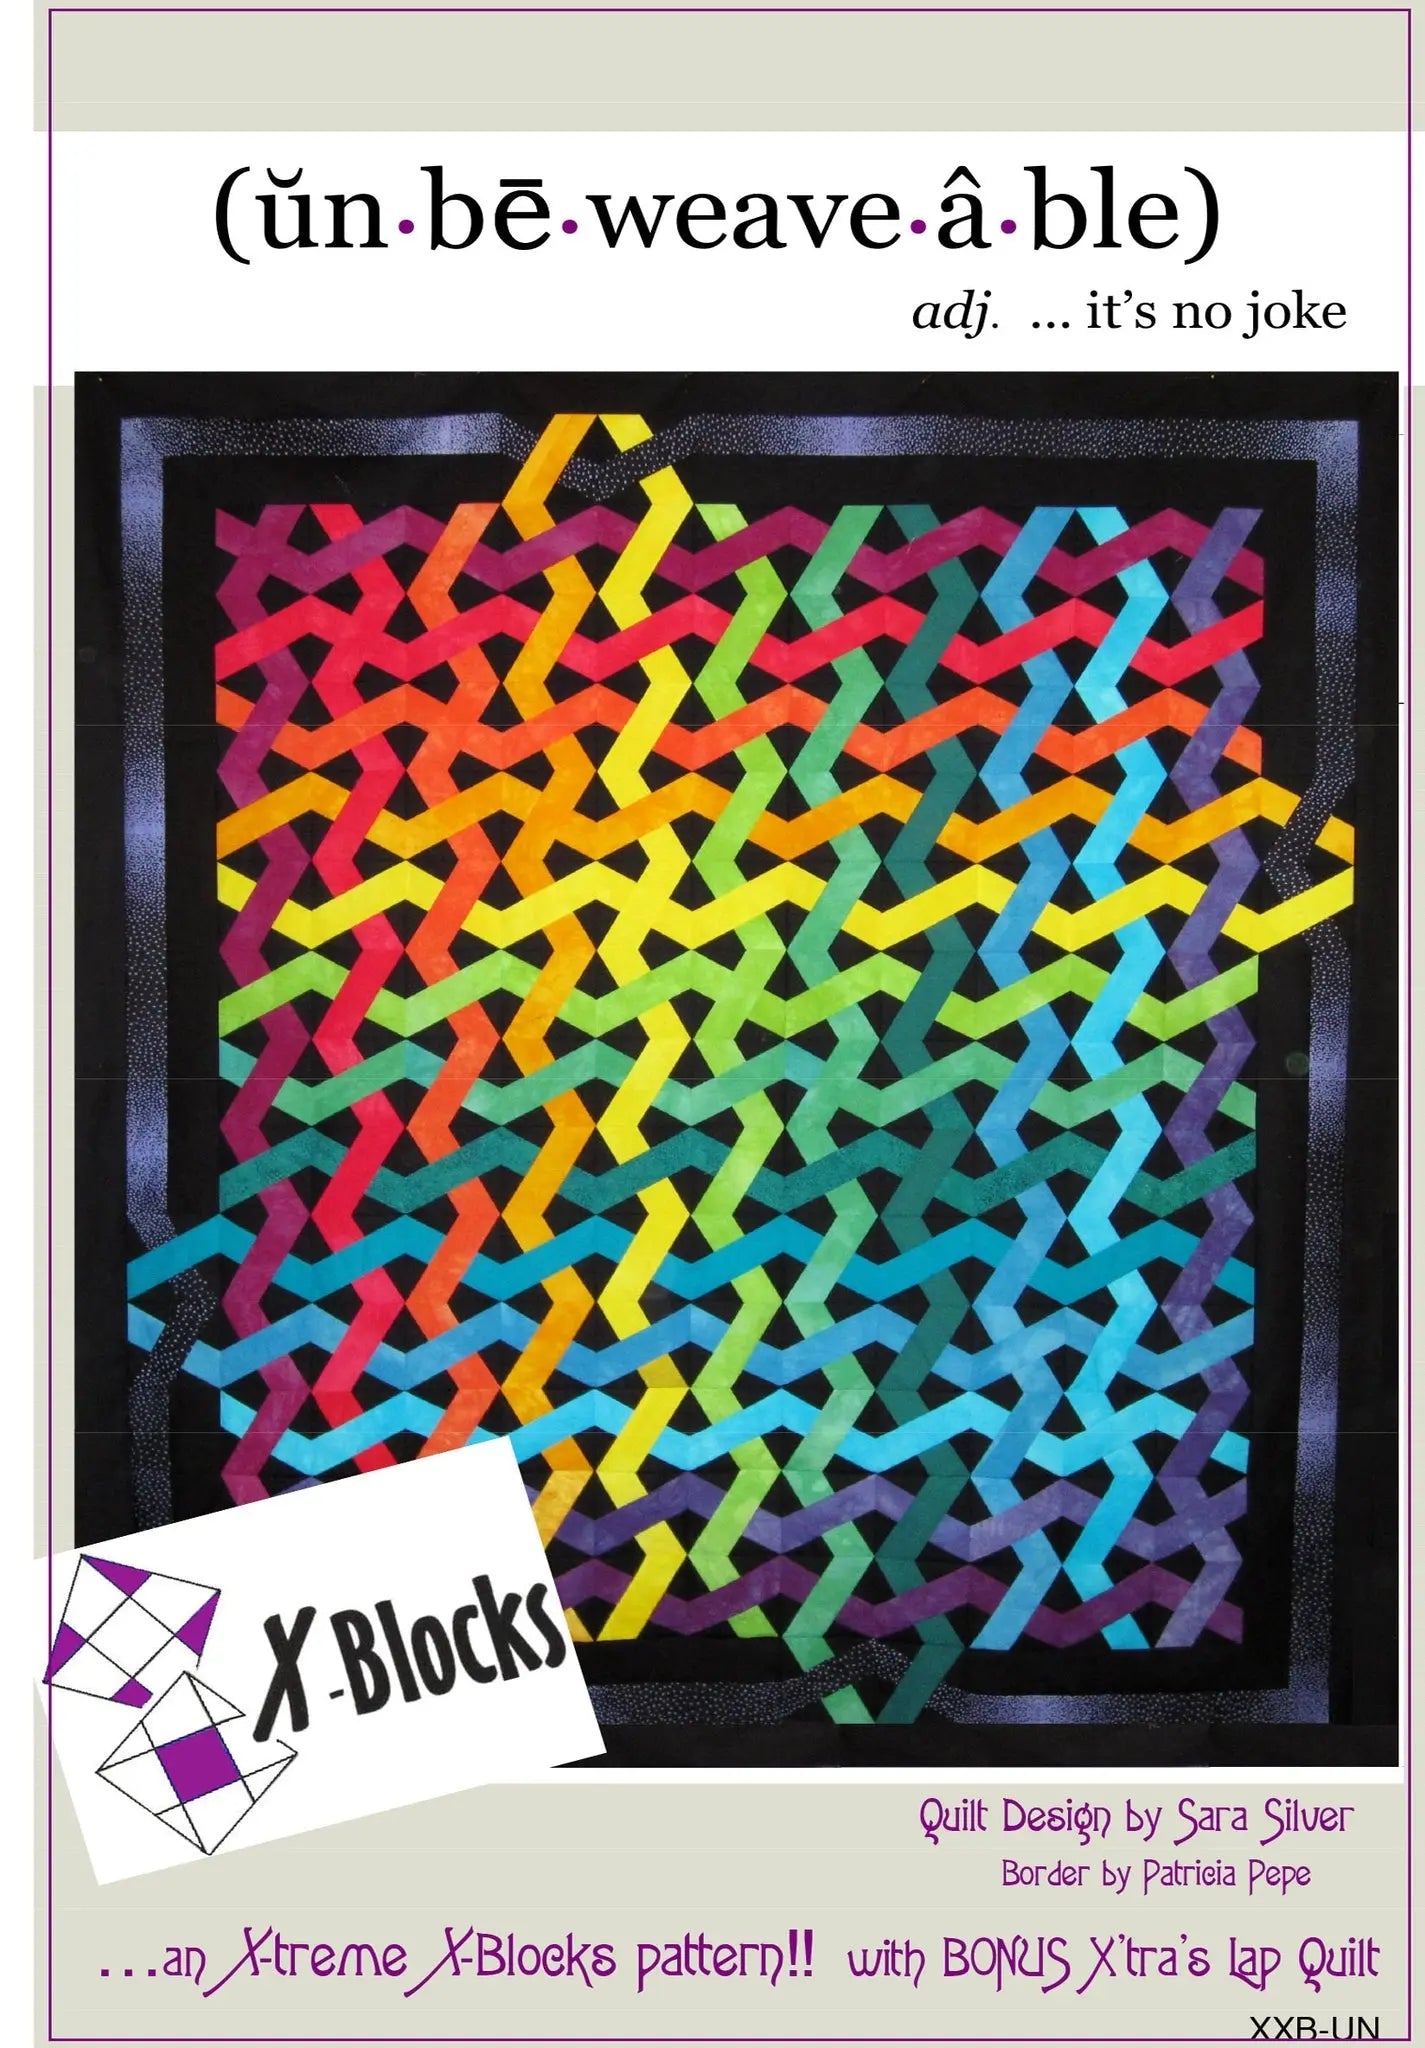 X-Block Extreme Unbeweaveable Pattern - Linda's Electric Quilters